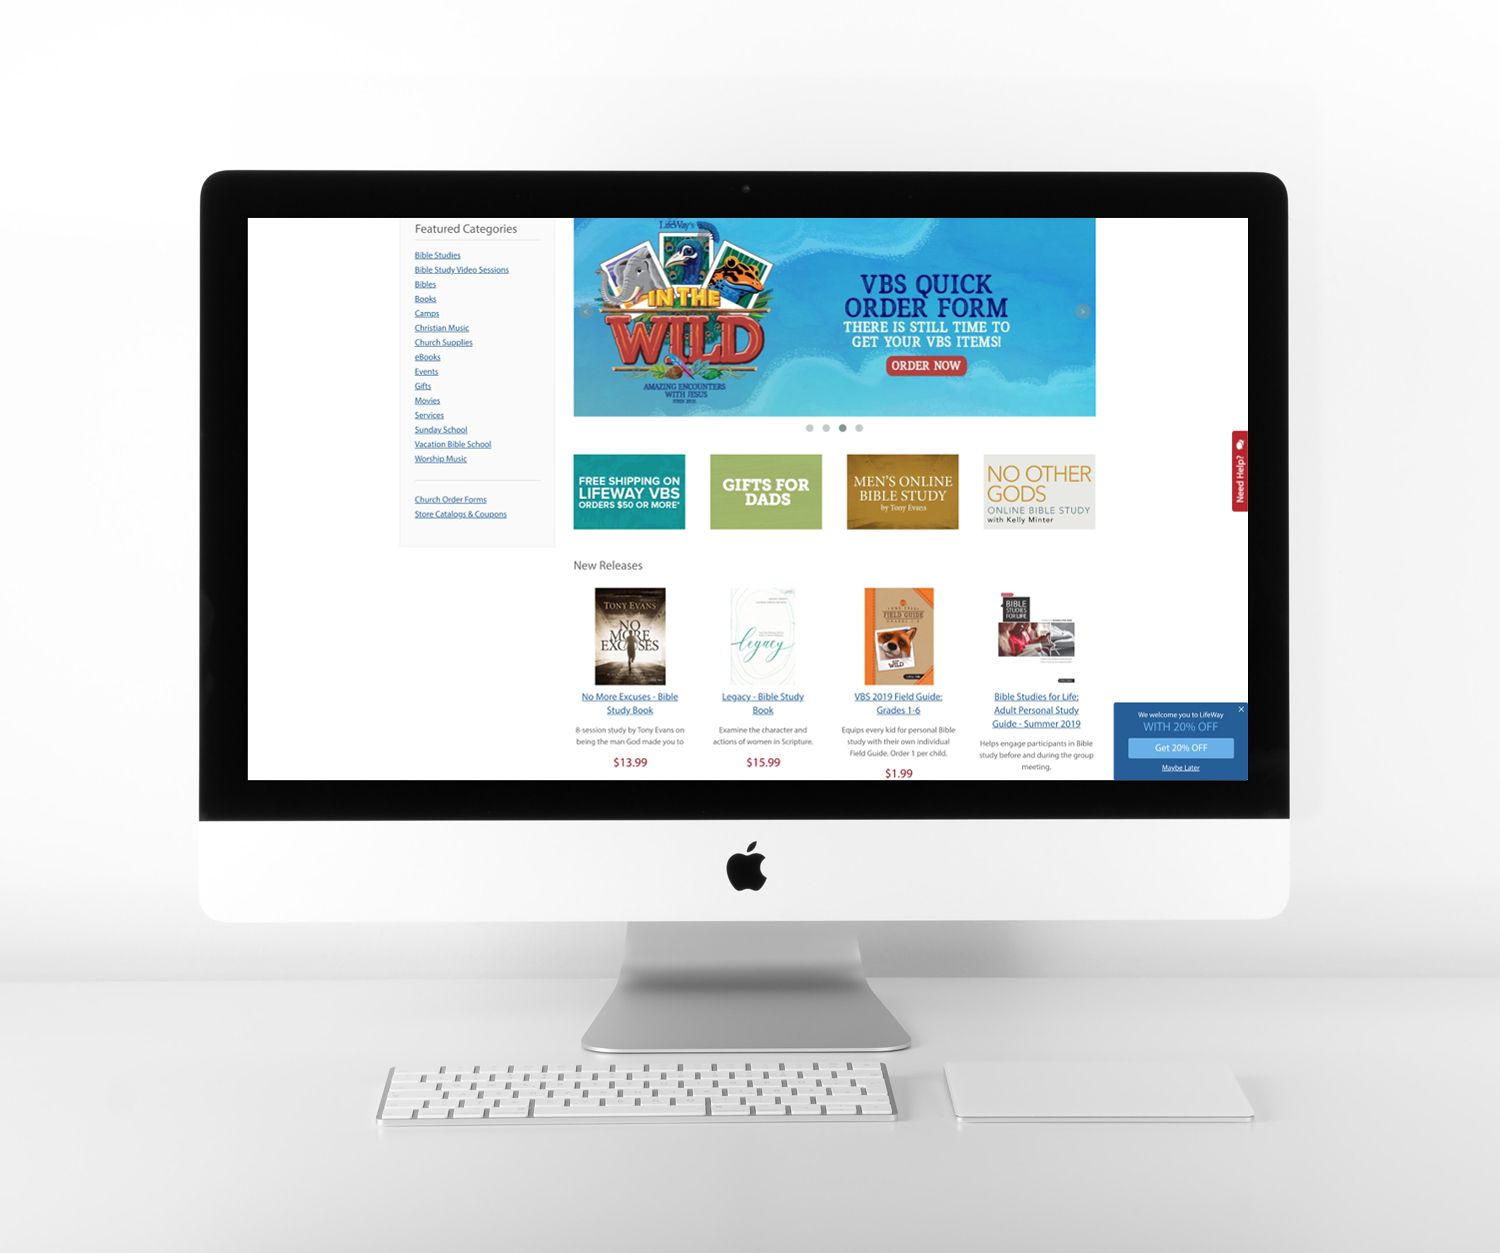 Image of LifeWay.com with Value-Offer Popup displayed on an iMac